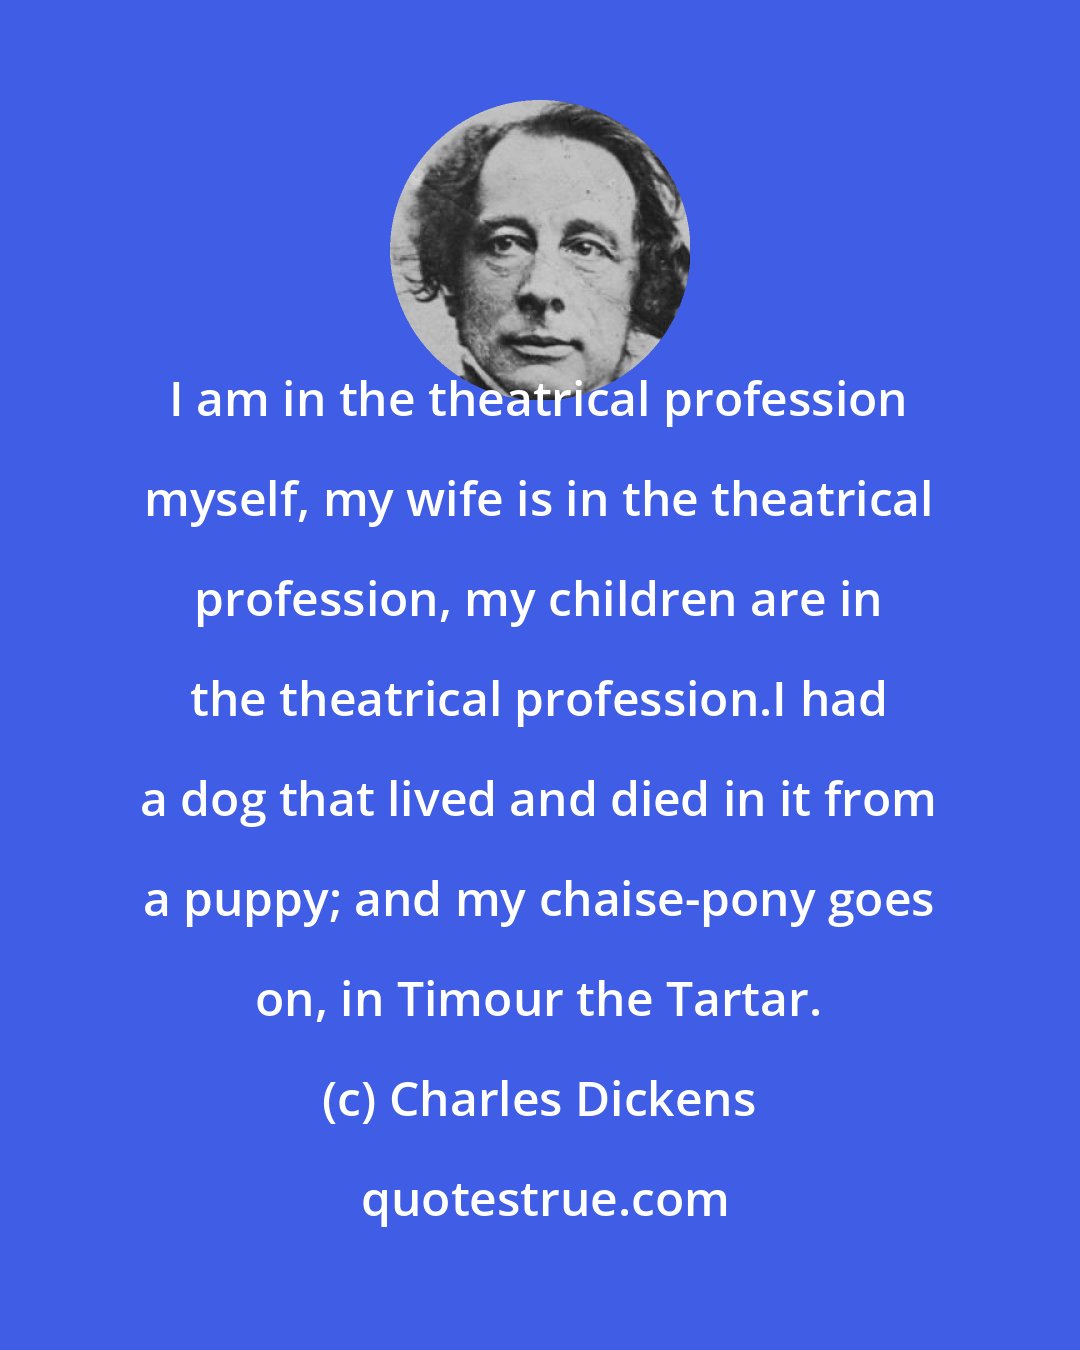 Charles Dickens: I am in the theatrical profession myself, my wife is in the theatrical profession, my children are in the theatrical profession.I had a dog that lived and died in it from a puppy; and my chaise-pony goes on, in Timour the Tartar.